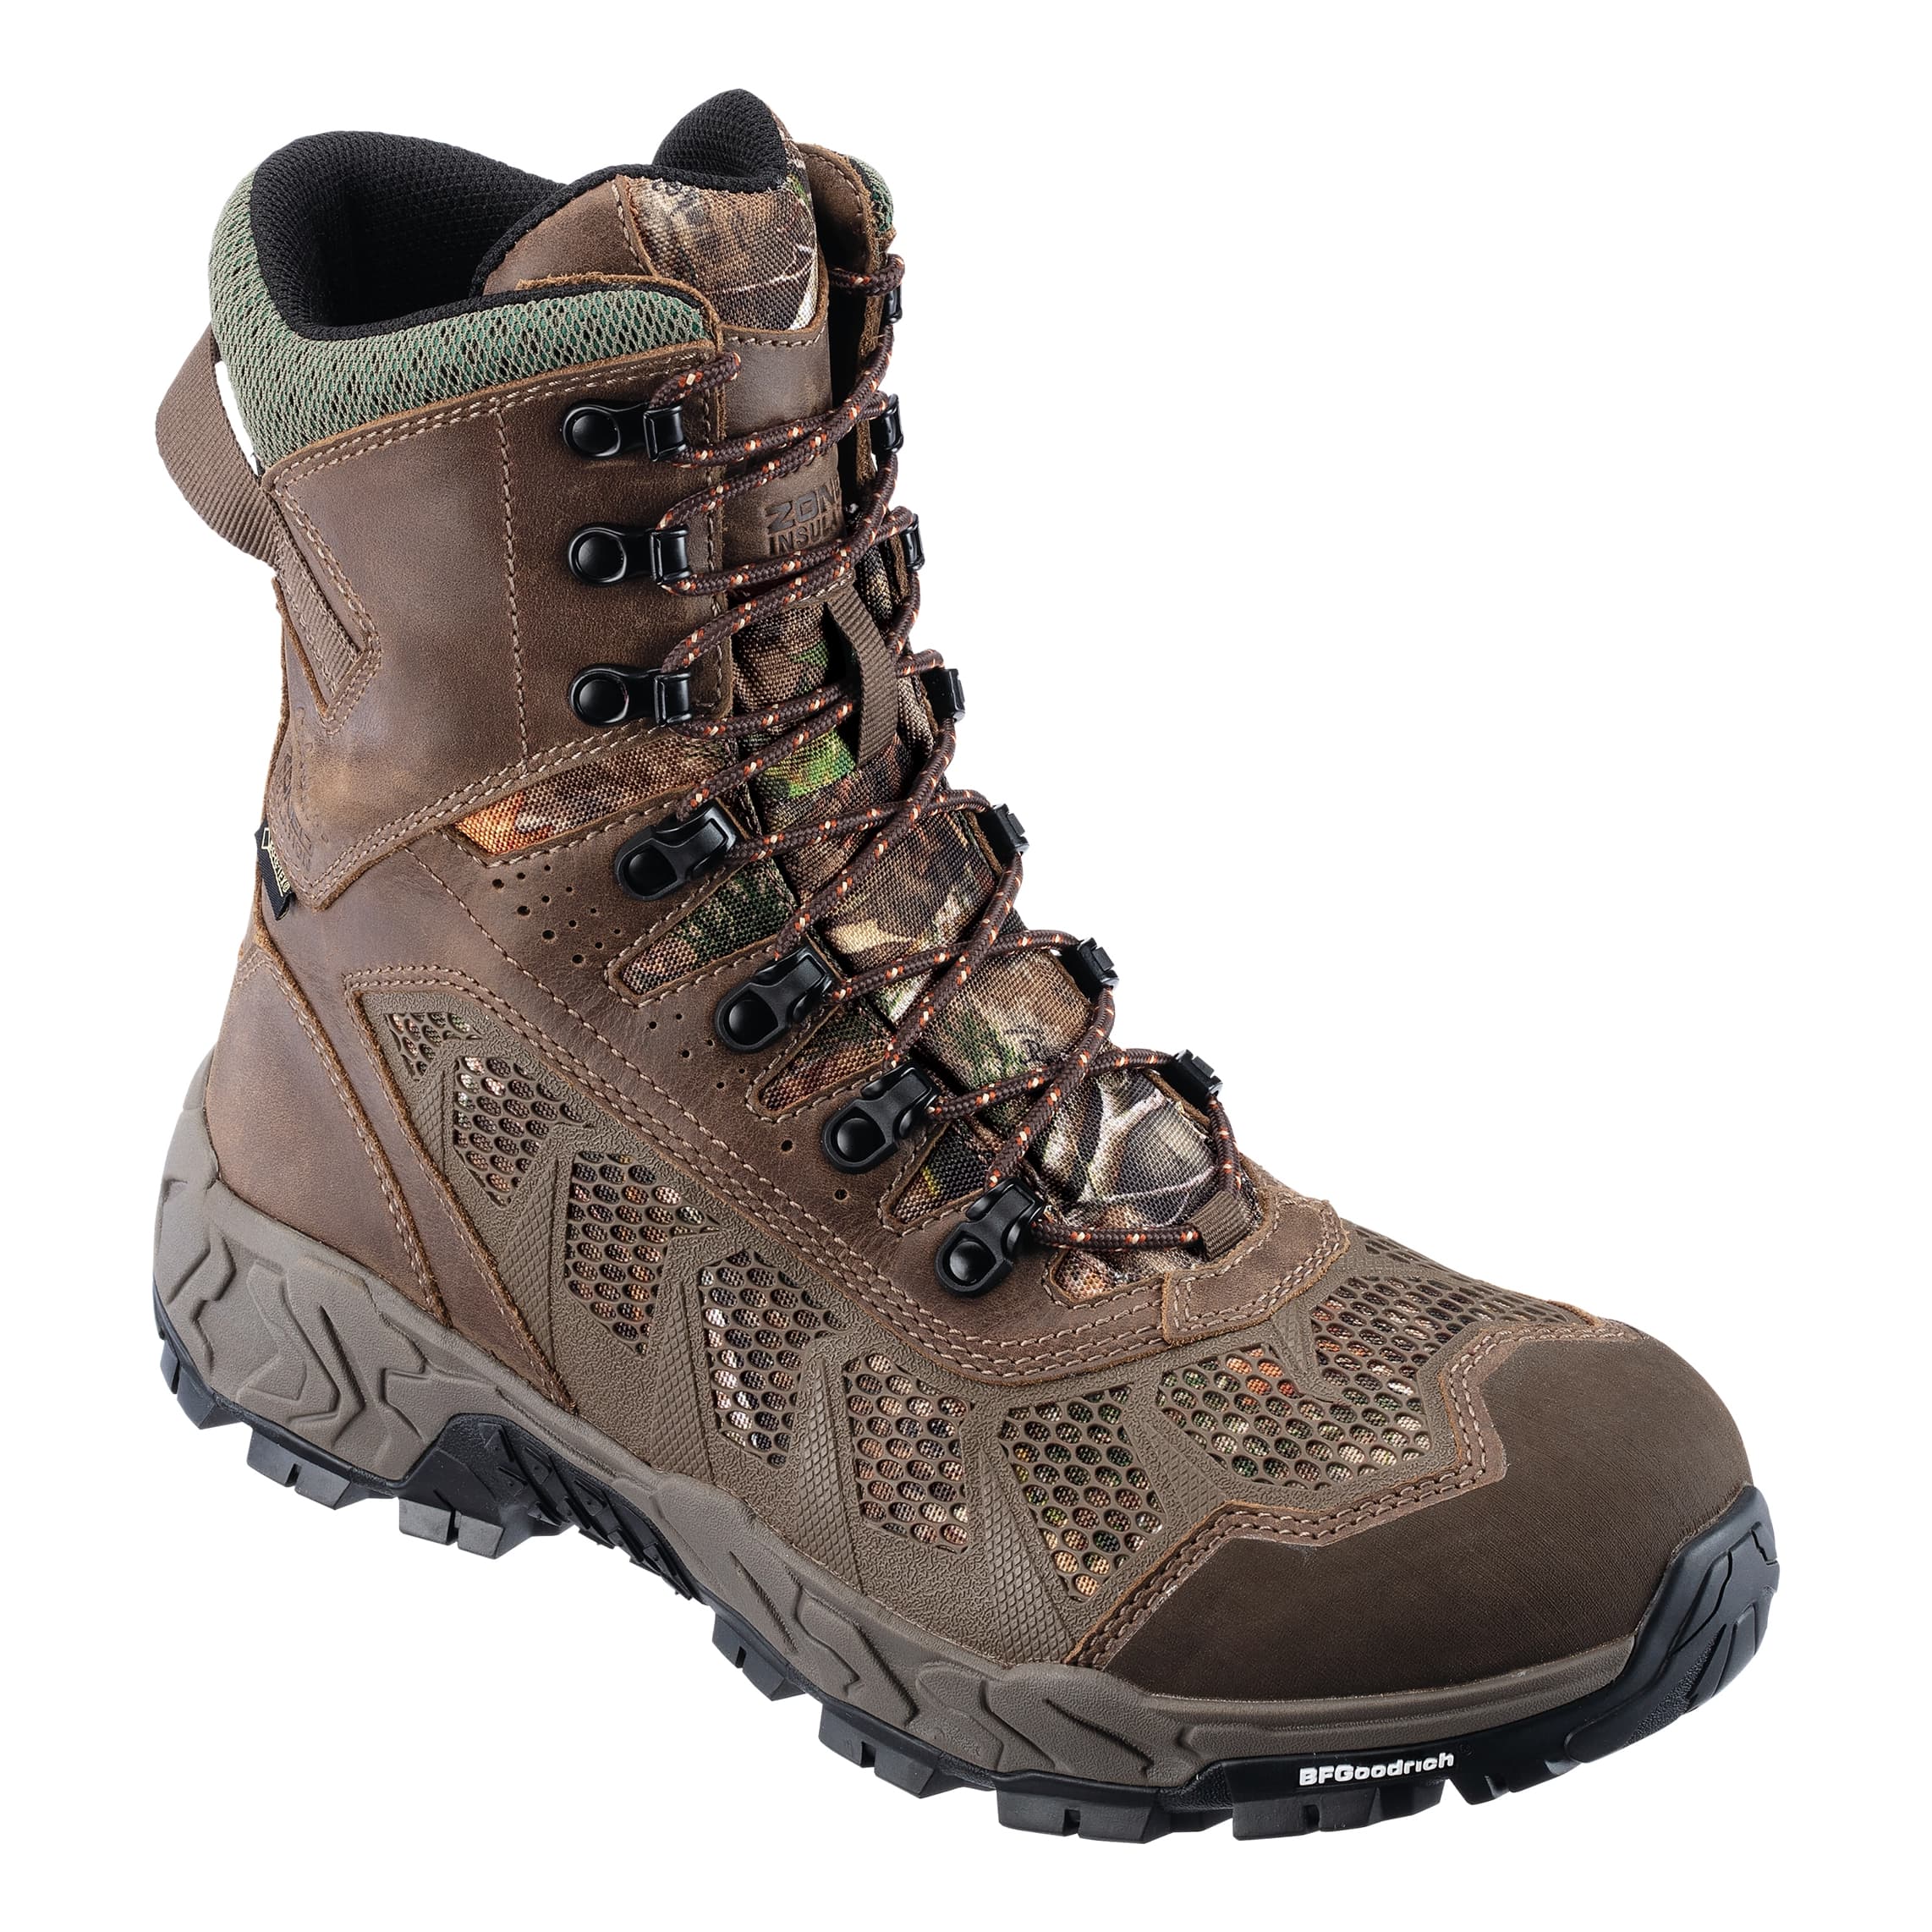 Cabela’s Men’s Treadfast GORE-TEX® Insulated Hunting Boots